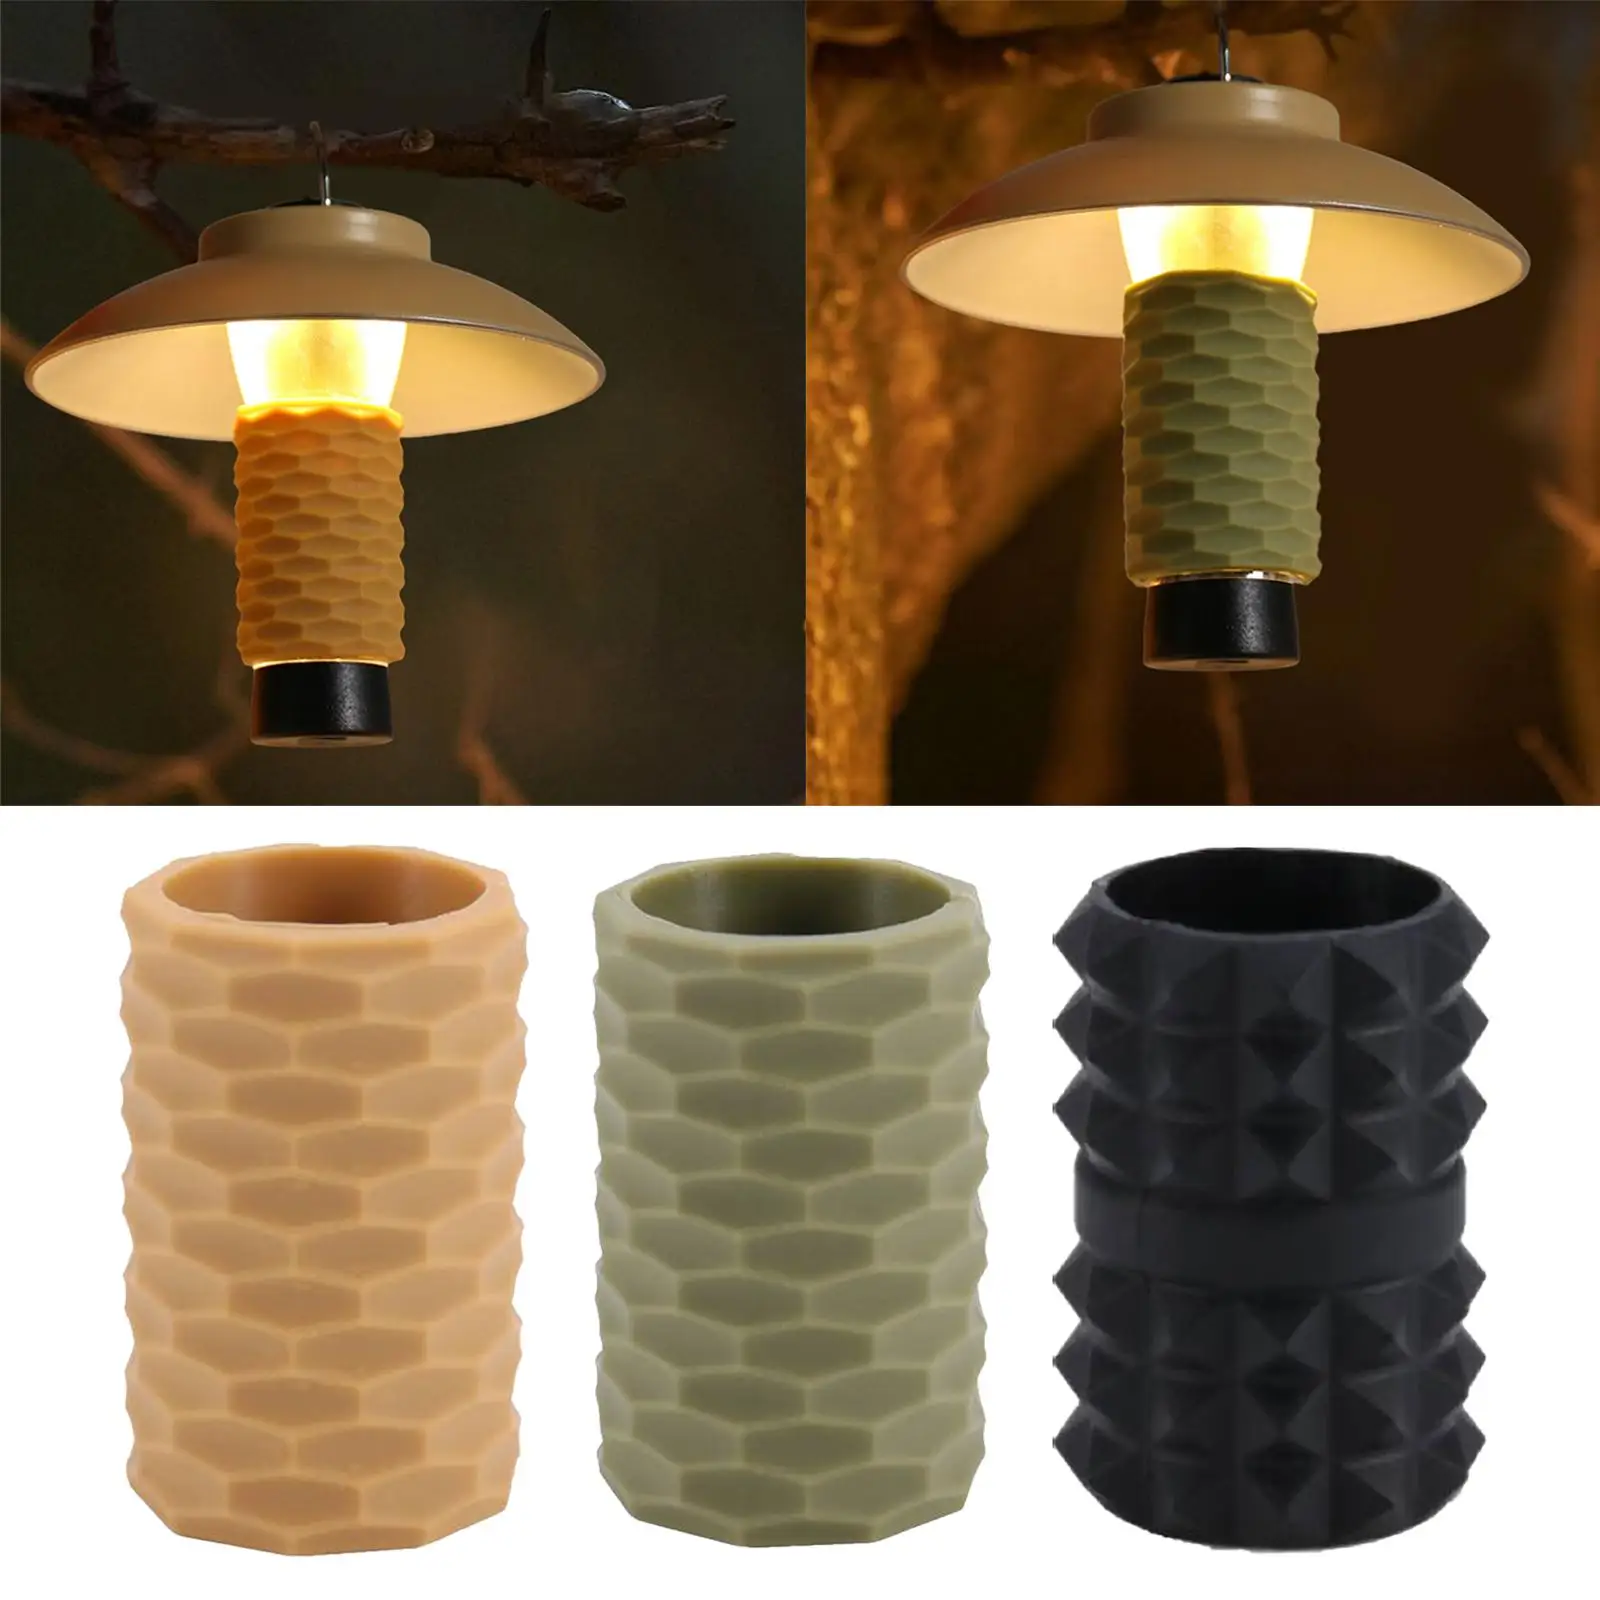 Lamp Sleeve Cover Camping Lights Cover Flashlight Holder Waterproof Hanging Lamp Lighthouse Torch Lantern Lampshade for Lighting